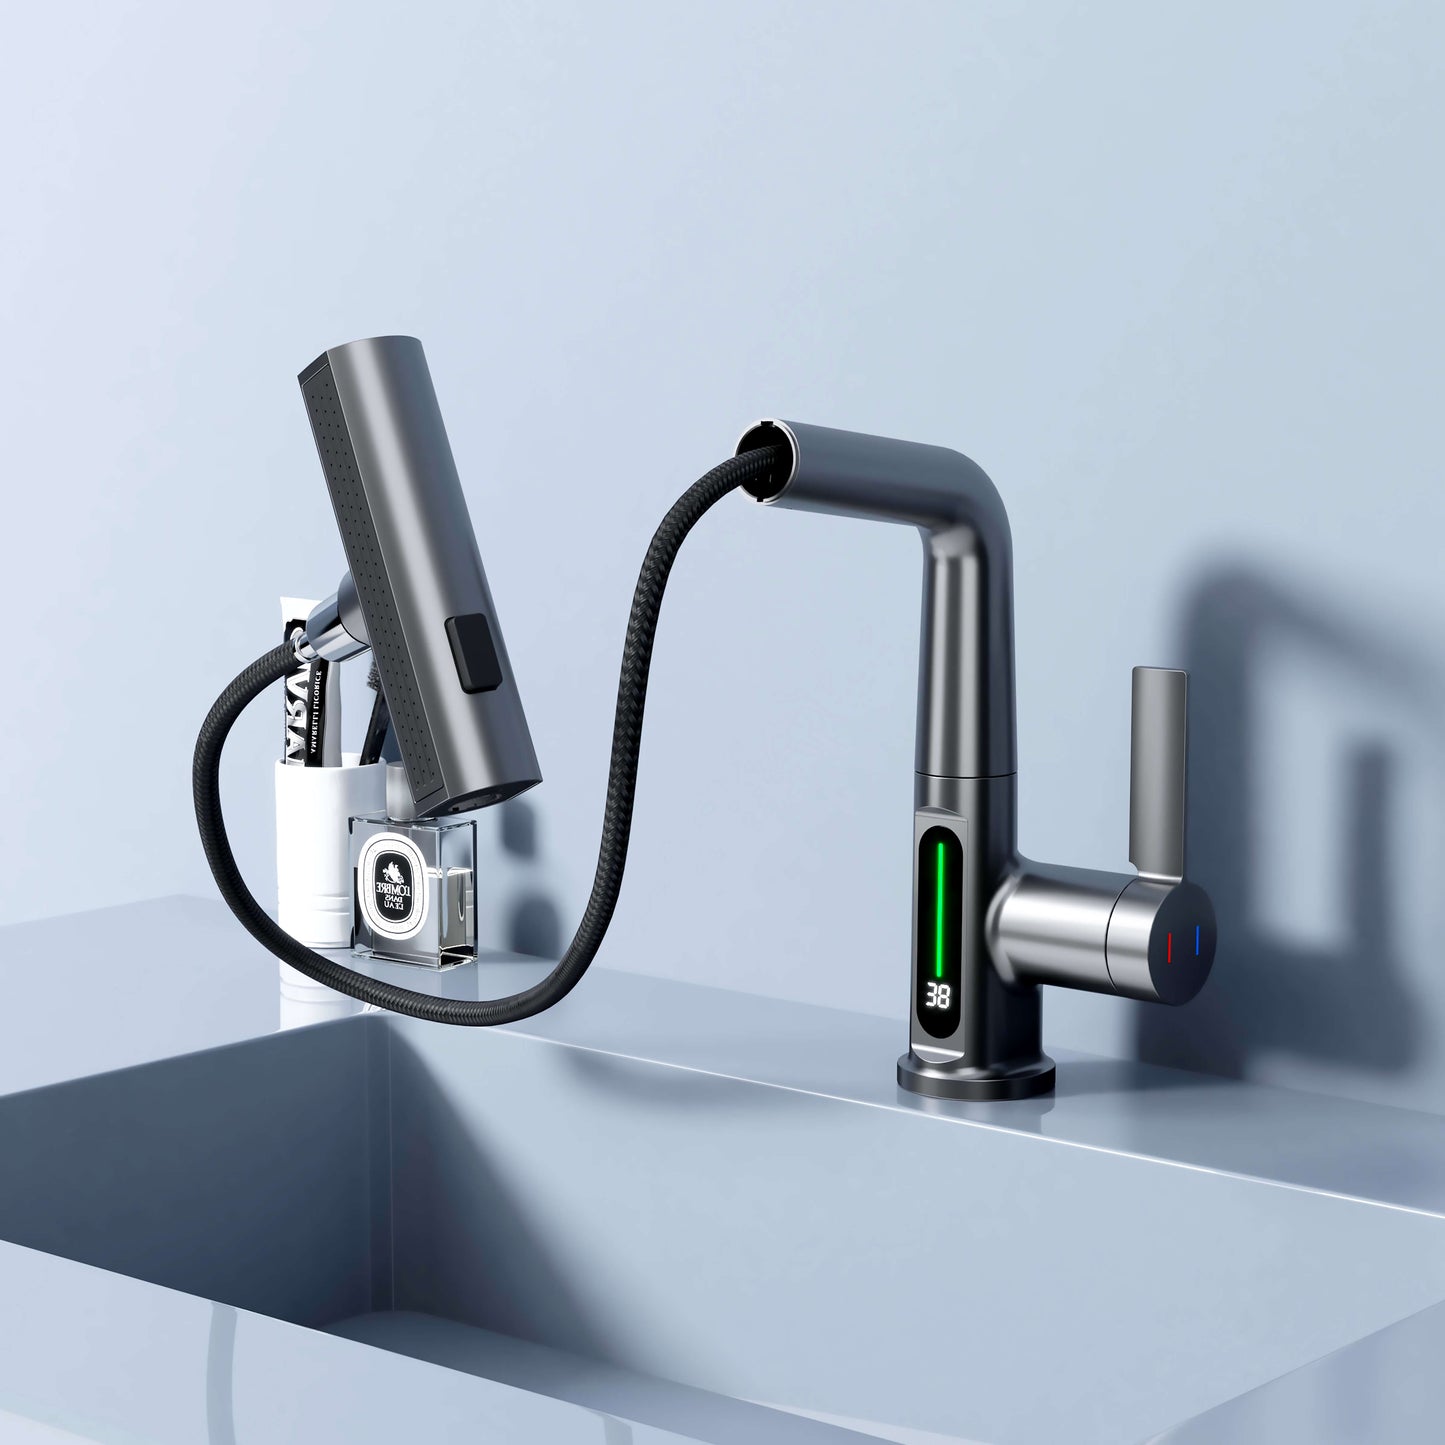 The Beta Essential Waterfall Faucet